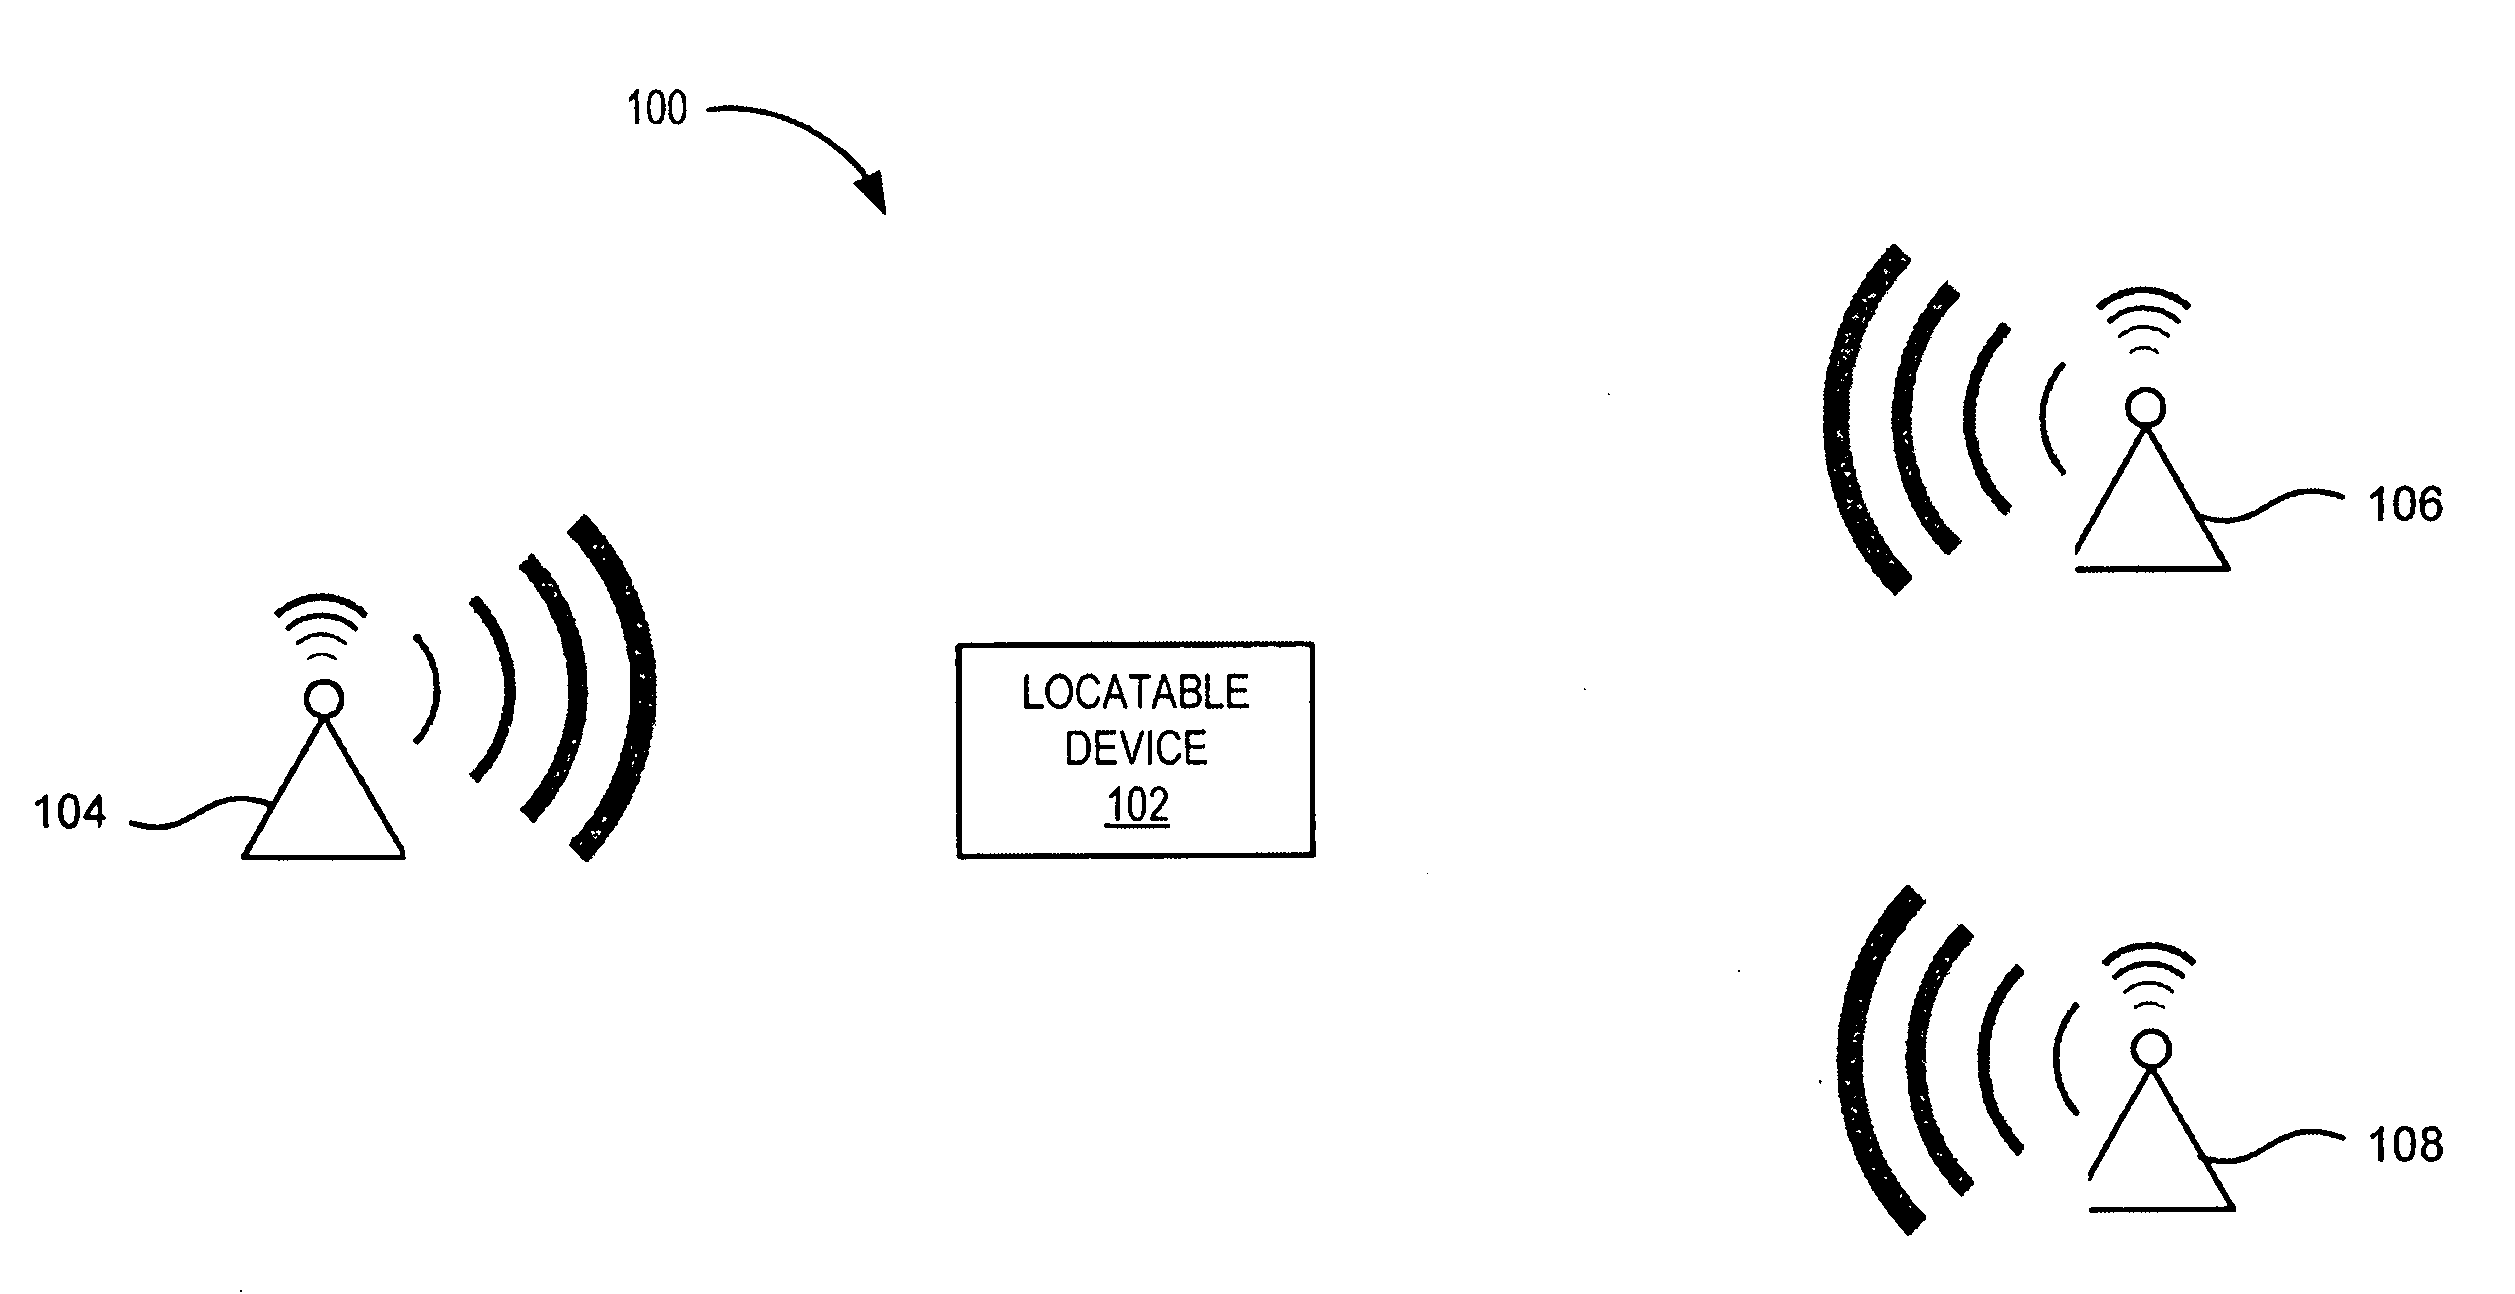 Geographically self-labeling access points